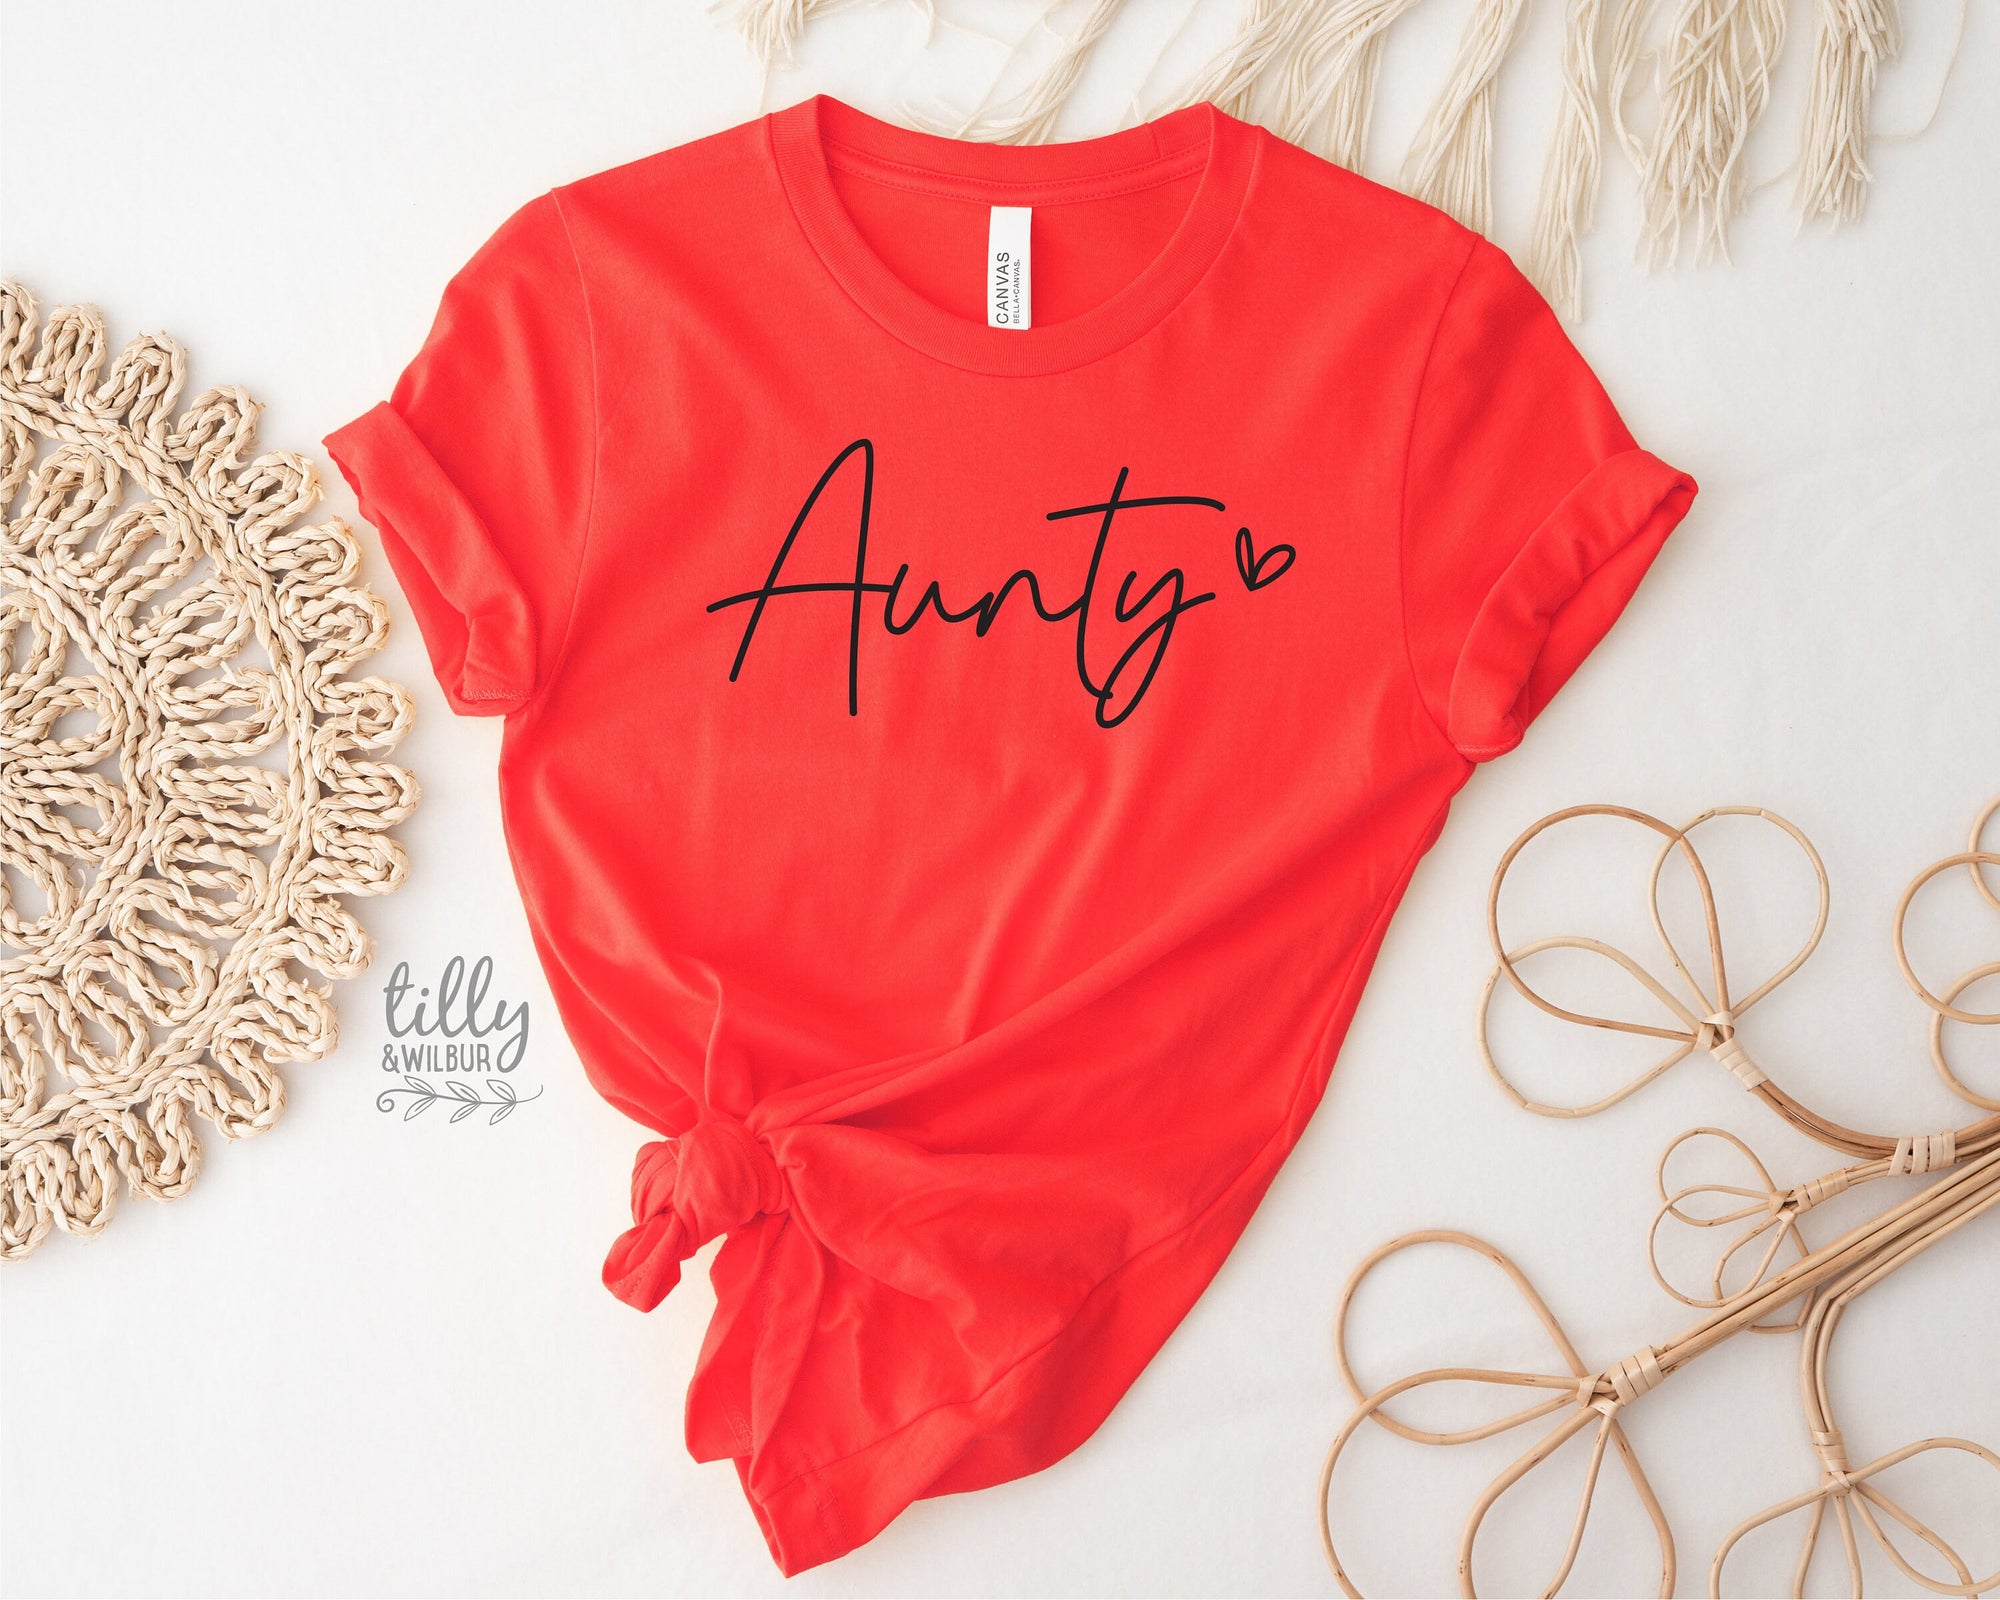 Aunty T-Shirt, Pregnancy Announcement T-Shirt, I'm Going To Be An Aunty, Baby Shower Gift, Aunty, Auntie, Sister Gift, Red With Black